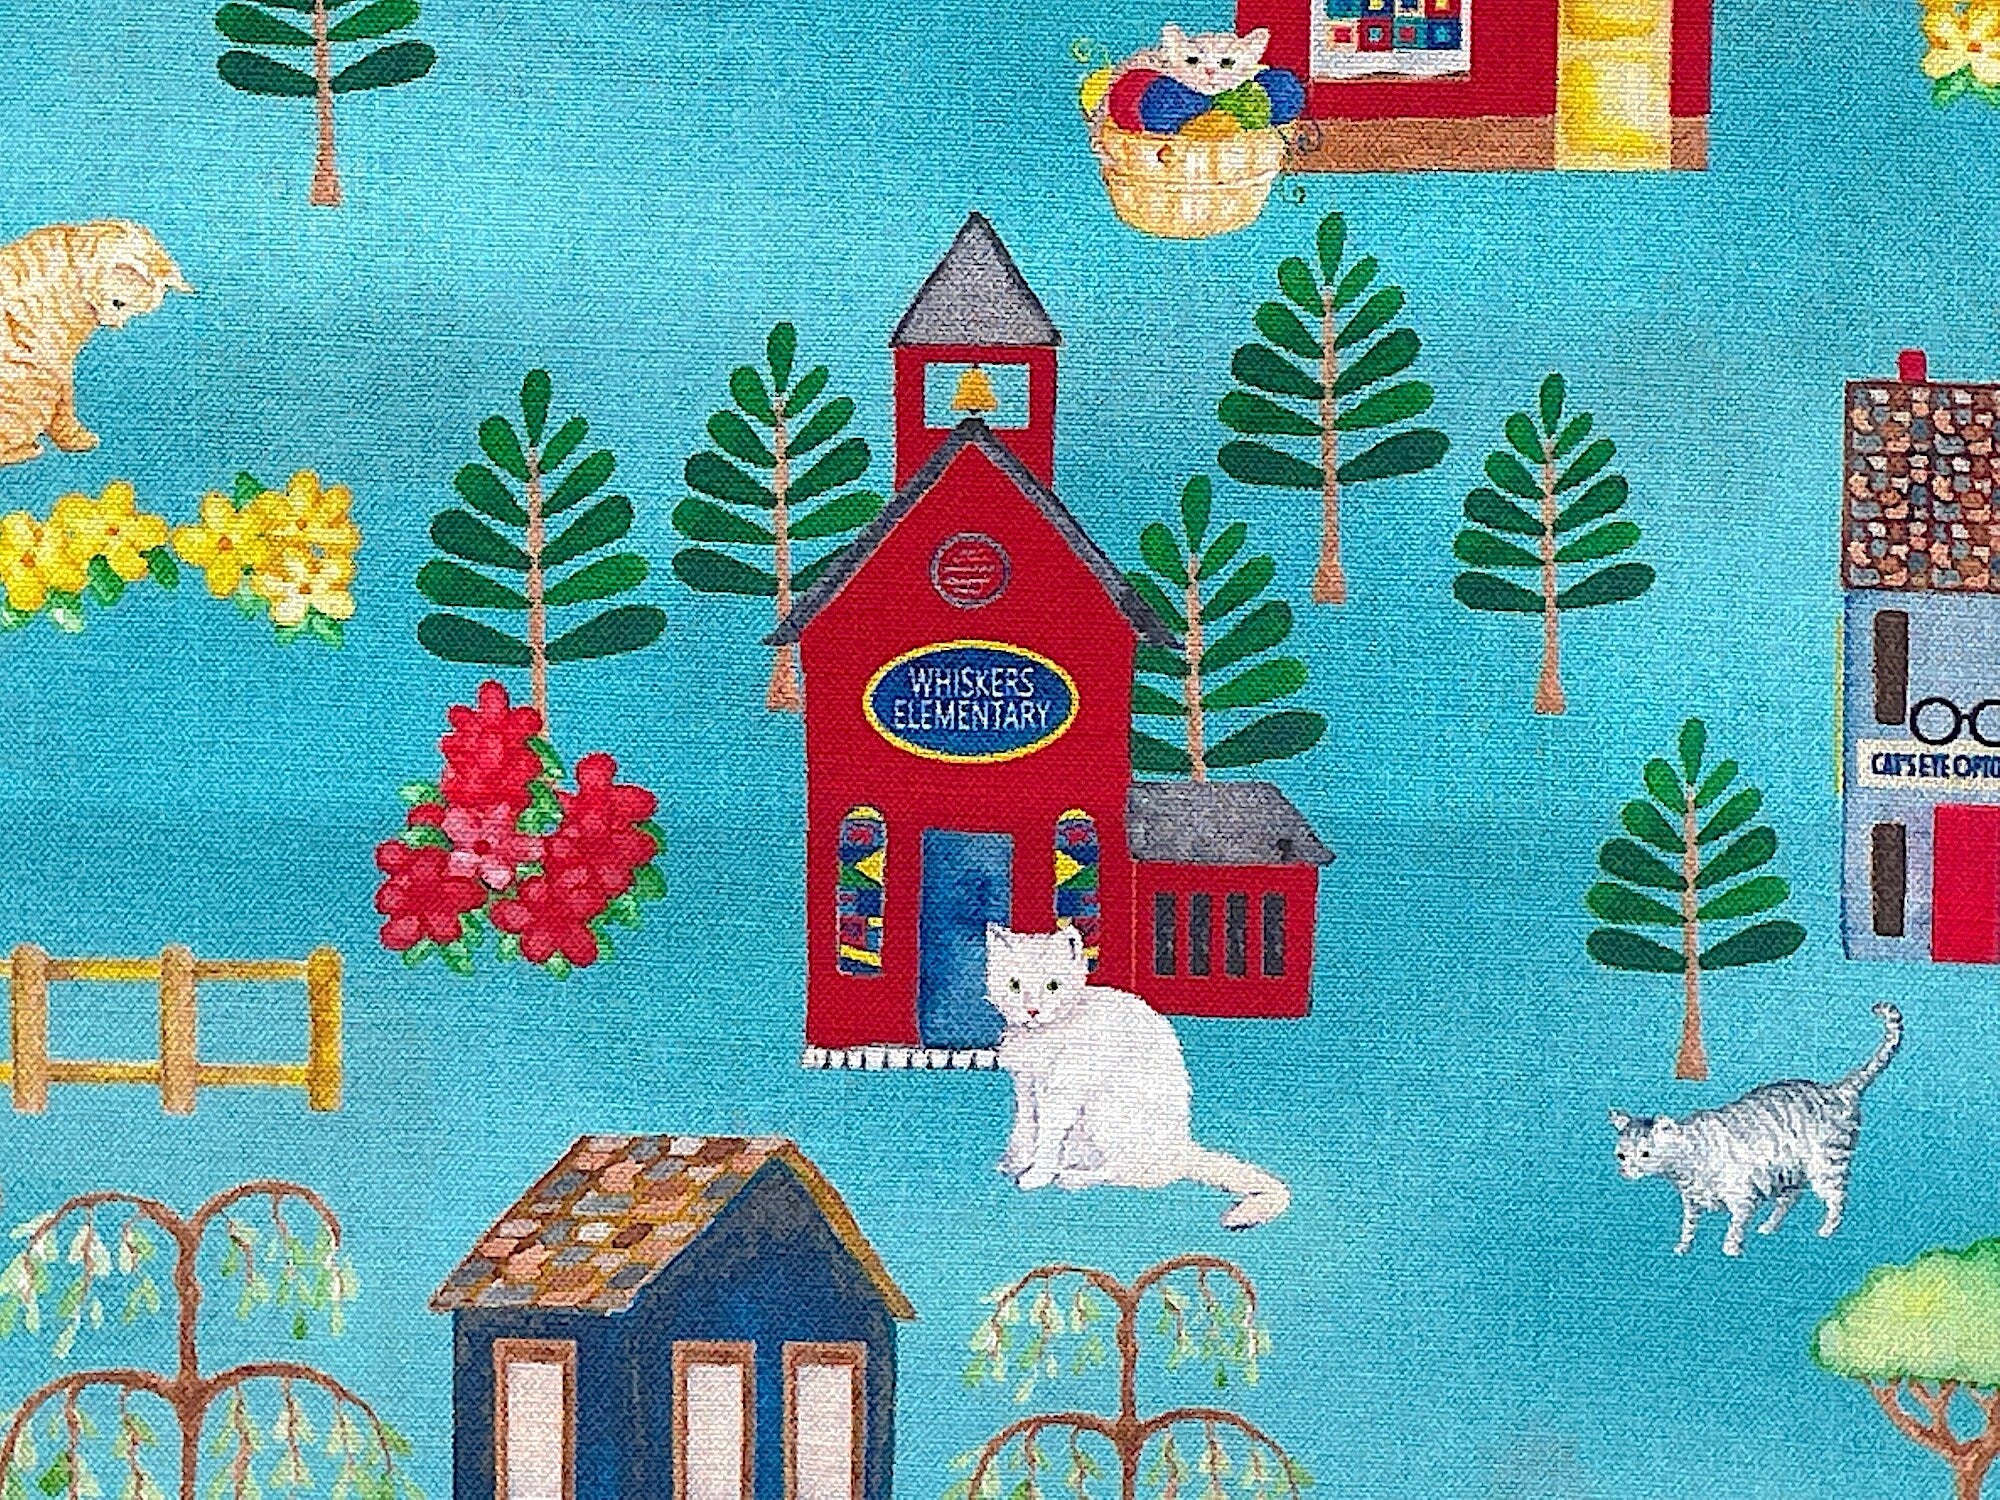 Cotton fabric with whiskers elementary, cats, trees, flowers and more.